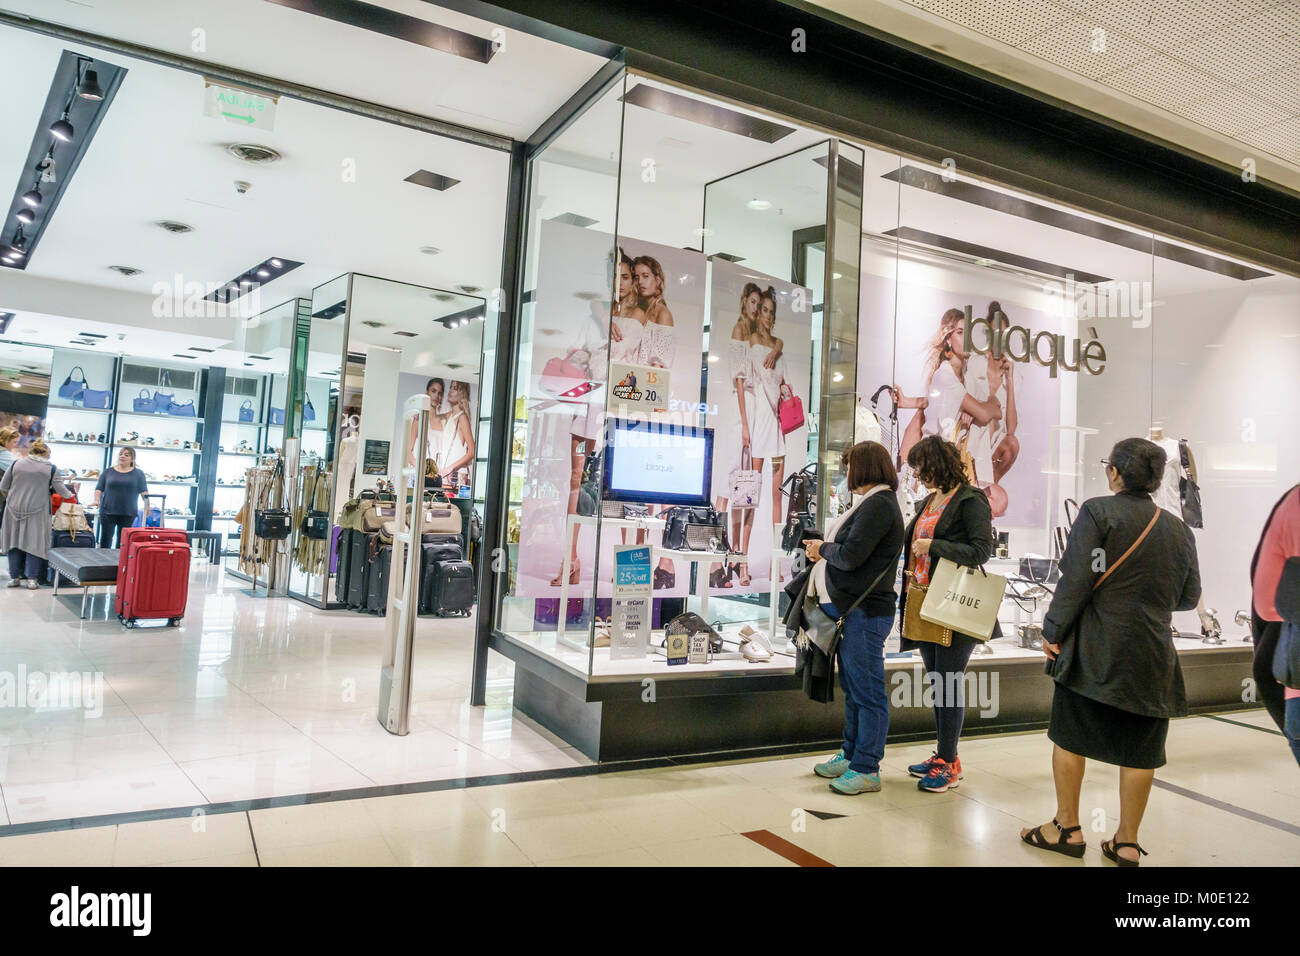 Buenos Aires Argentina,Abasto Shopping Mall,Blaque,store,shoes,accessories,store,window,adult adults woman women female lady,looking watching,entrance Stock Photo